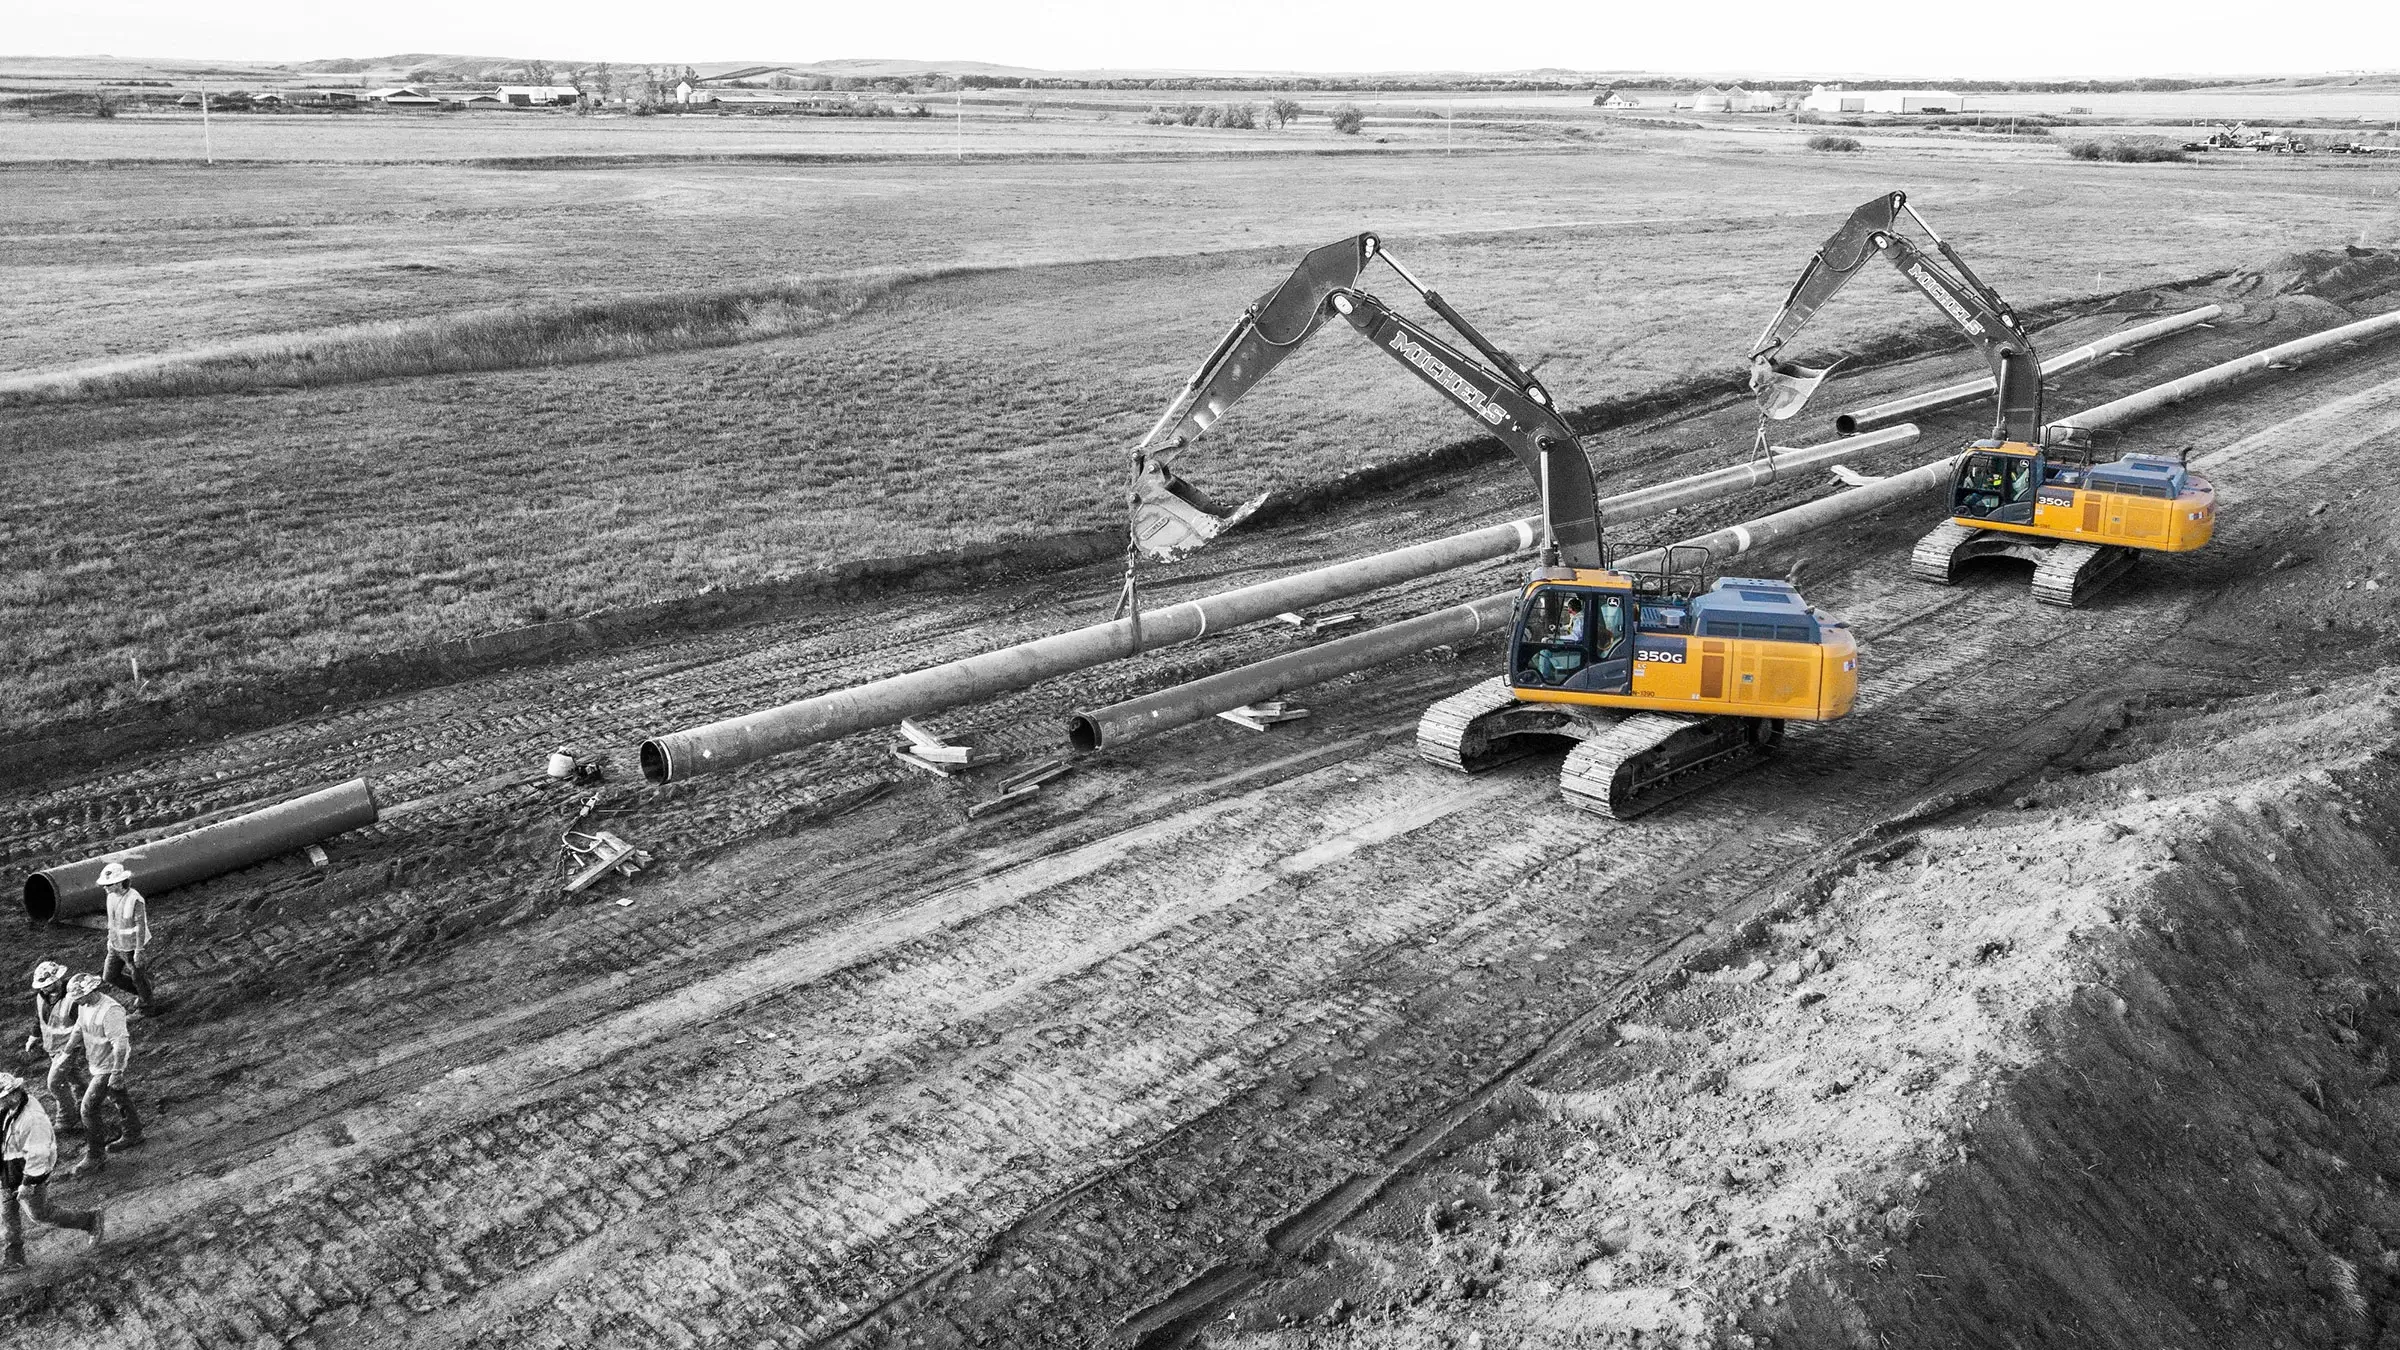 Two excavators assist in supporting the weight of a segment of pipe.